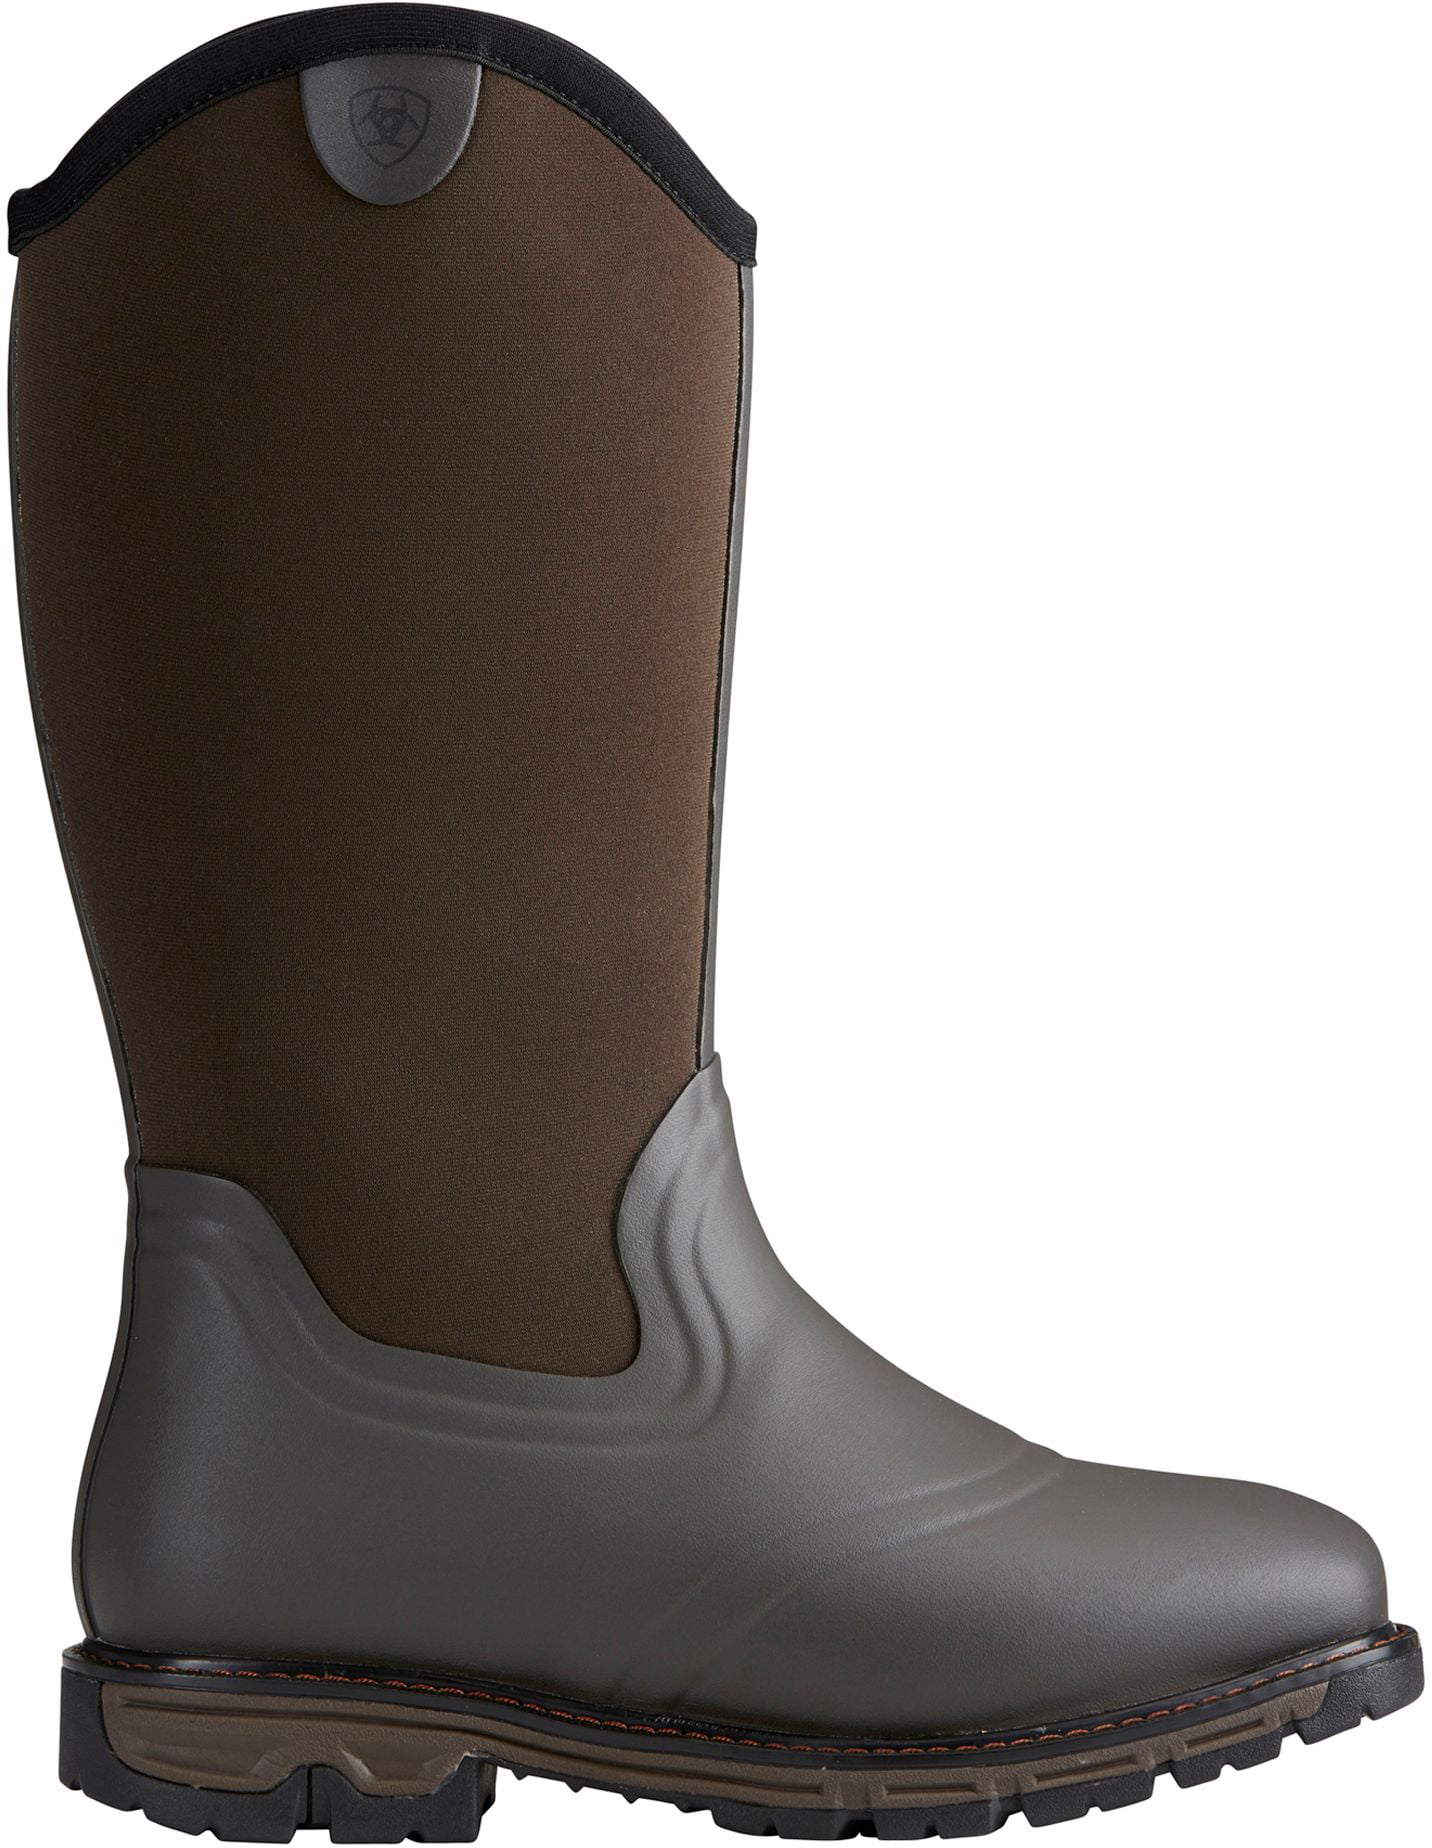 Ariat - Ariat Men's Conquest Neoprene Insulated Rubber Hunting Boots